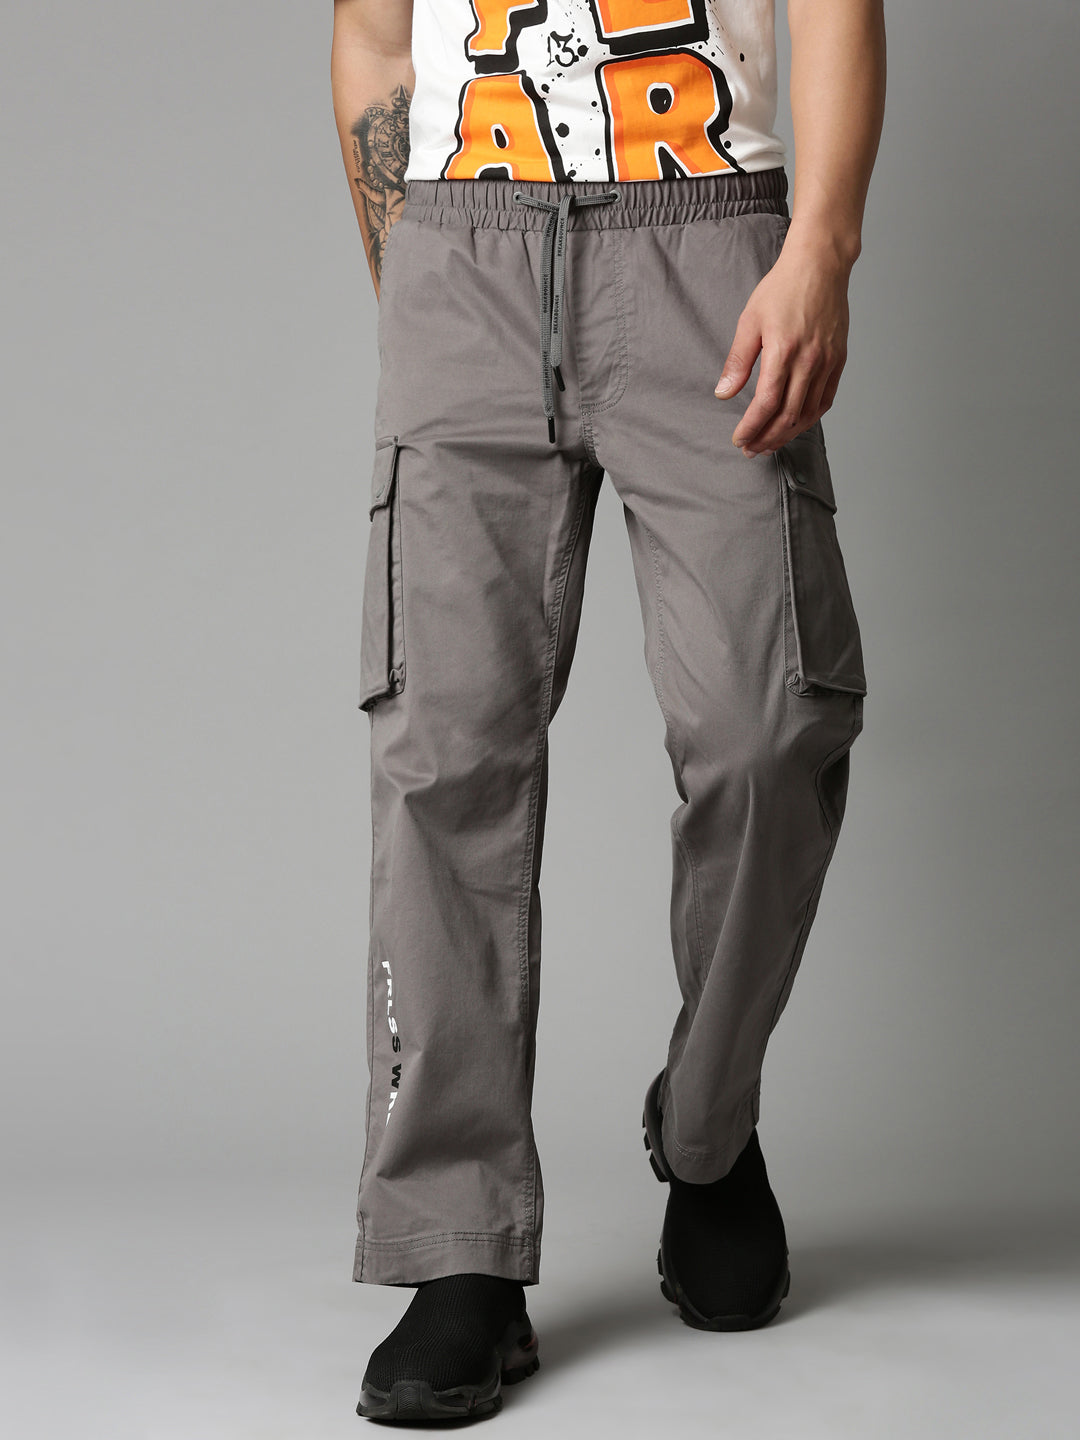 Mens Regular Fit Cargo Pant Length  Ankle Length Gender  unisex at Rs  500  Piece in Mumbai